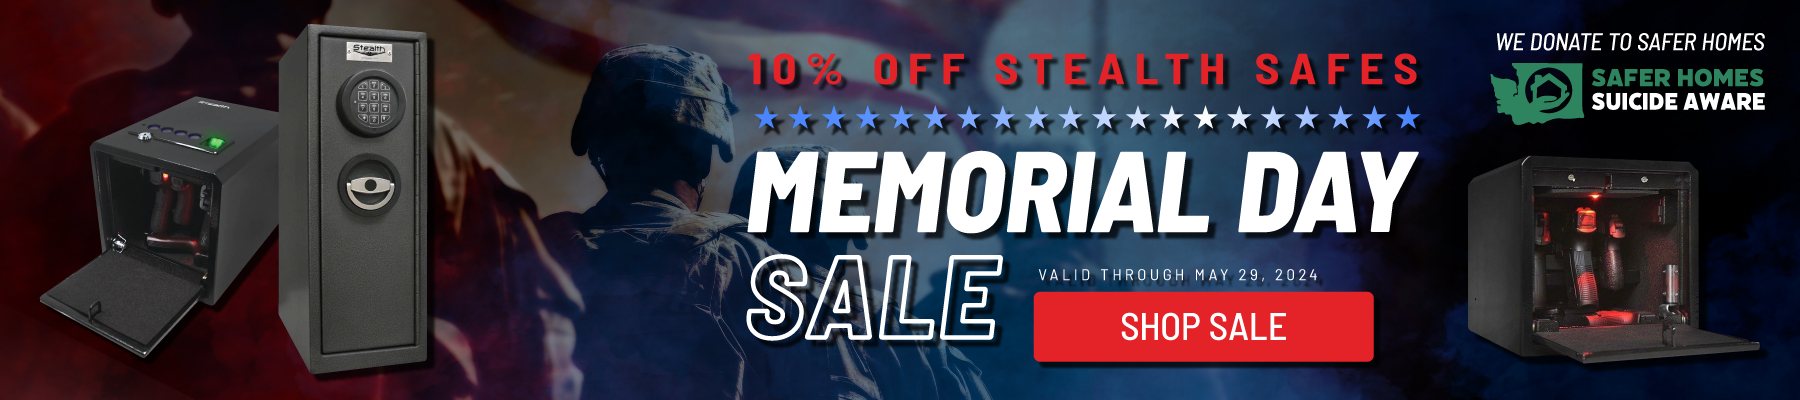 Stealth Memorial Day Sale